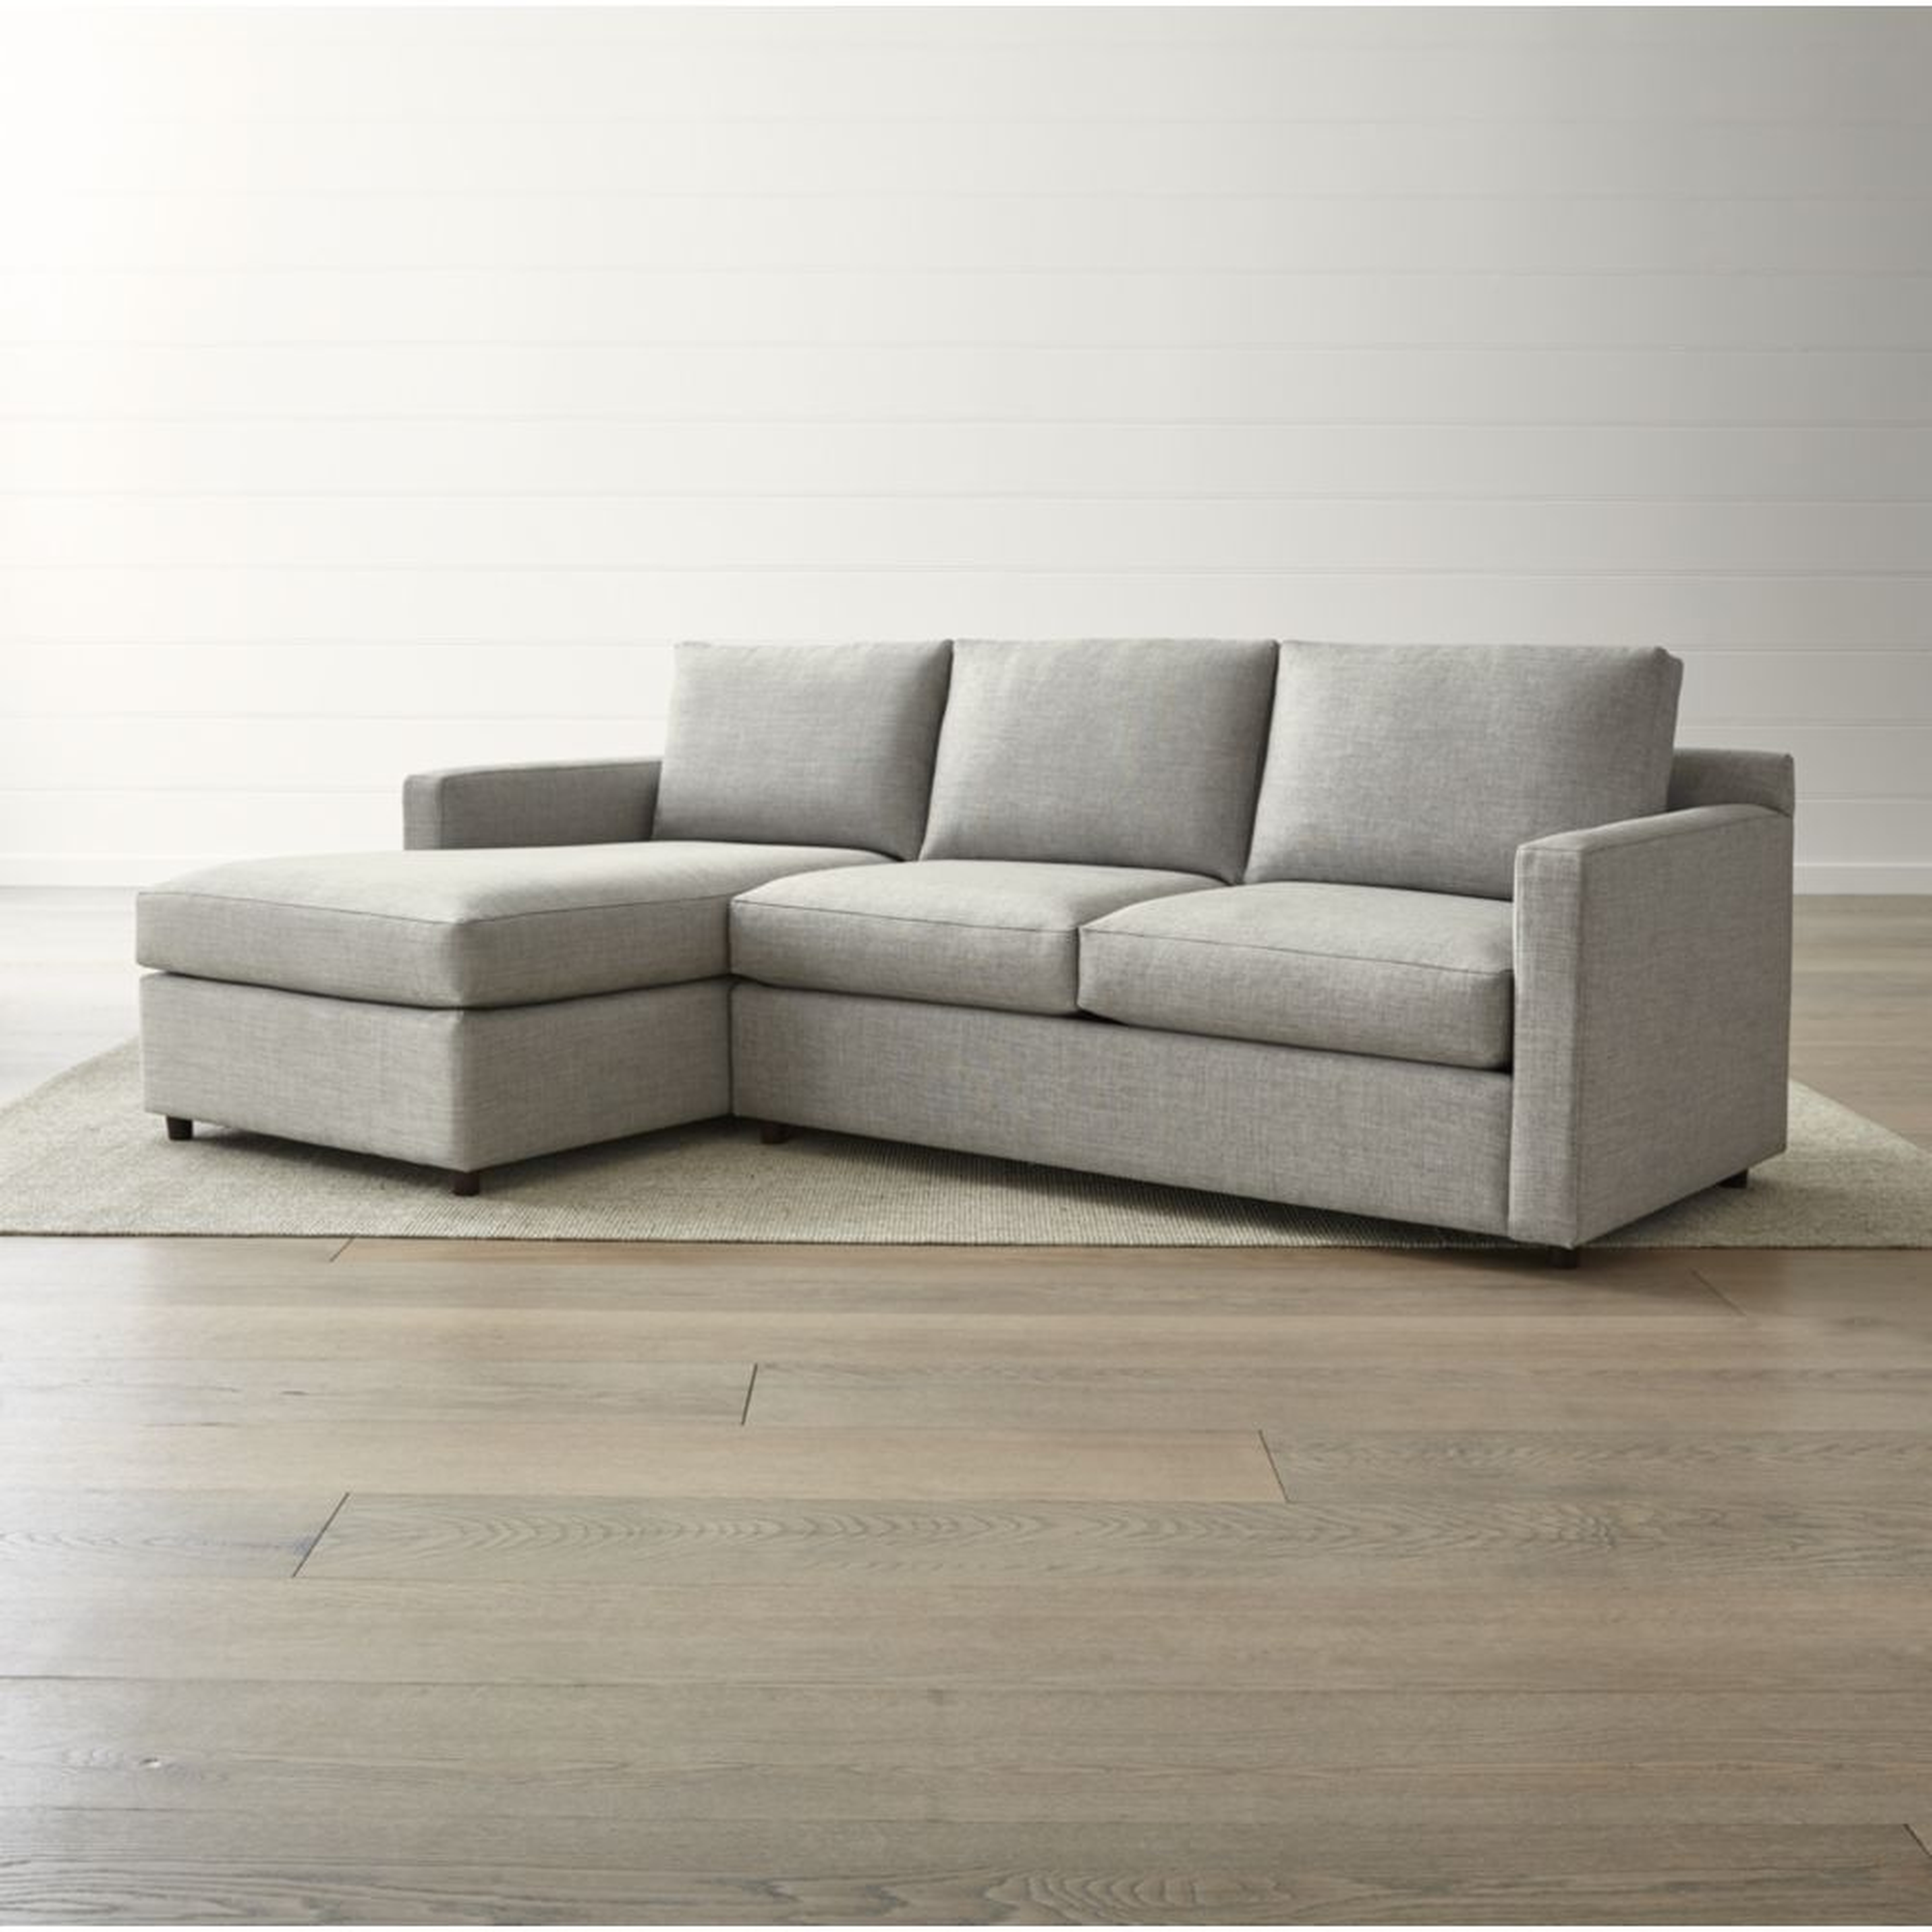 Barrett 2-Piece Left Arm Chaise Sectional - Crate and Barrel